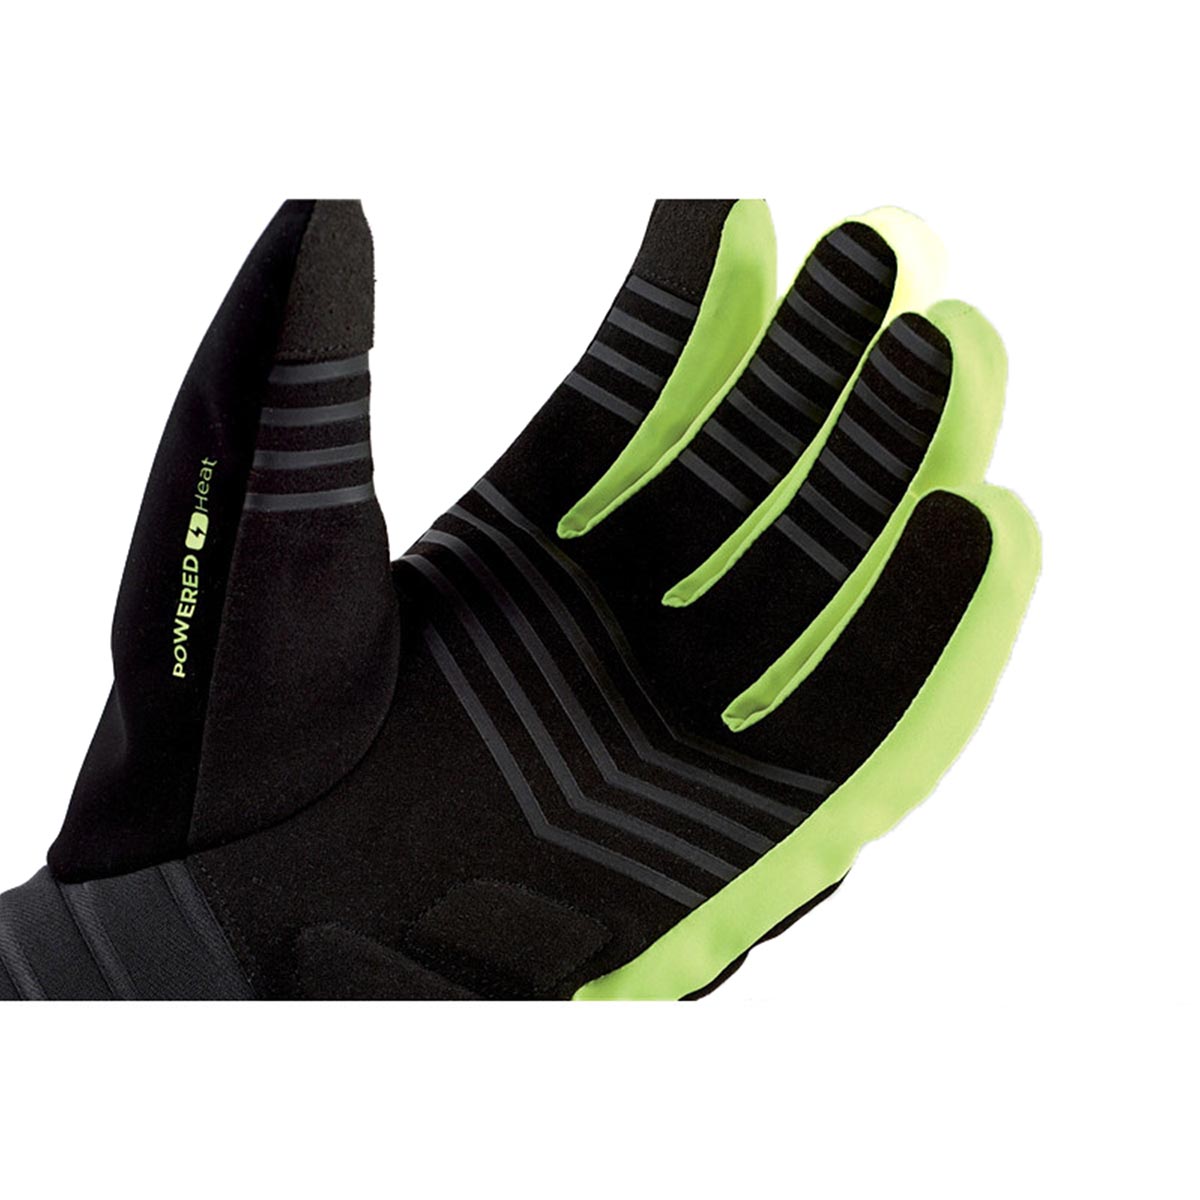 THERM-IC - POWERGLOVES LIGHT+ THIN HEATED GLOVES